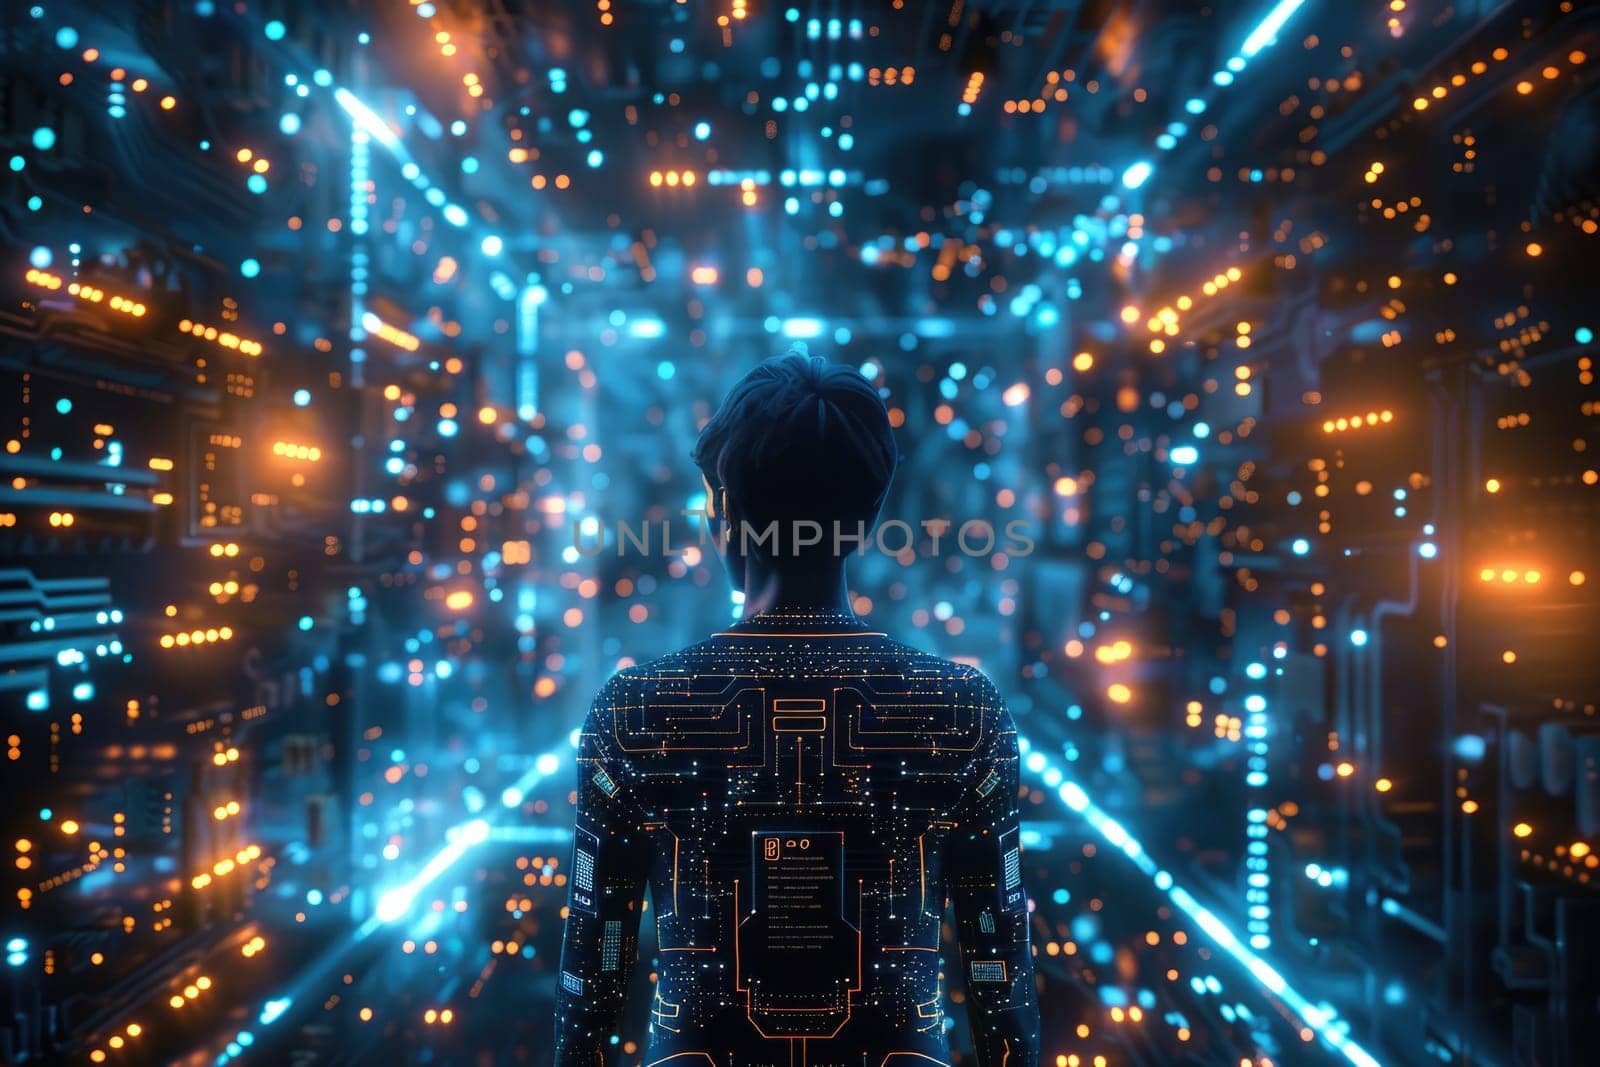 A man in a suit stands in a room full of glowing lights. The room is filled with a sense of wonder and awe, as if the man is in a futuristic world